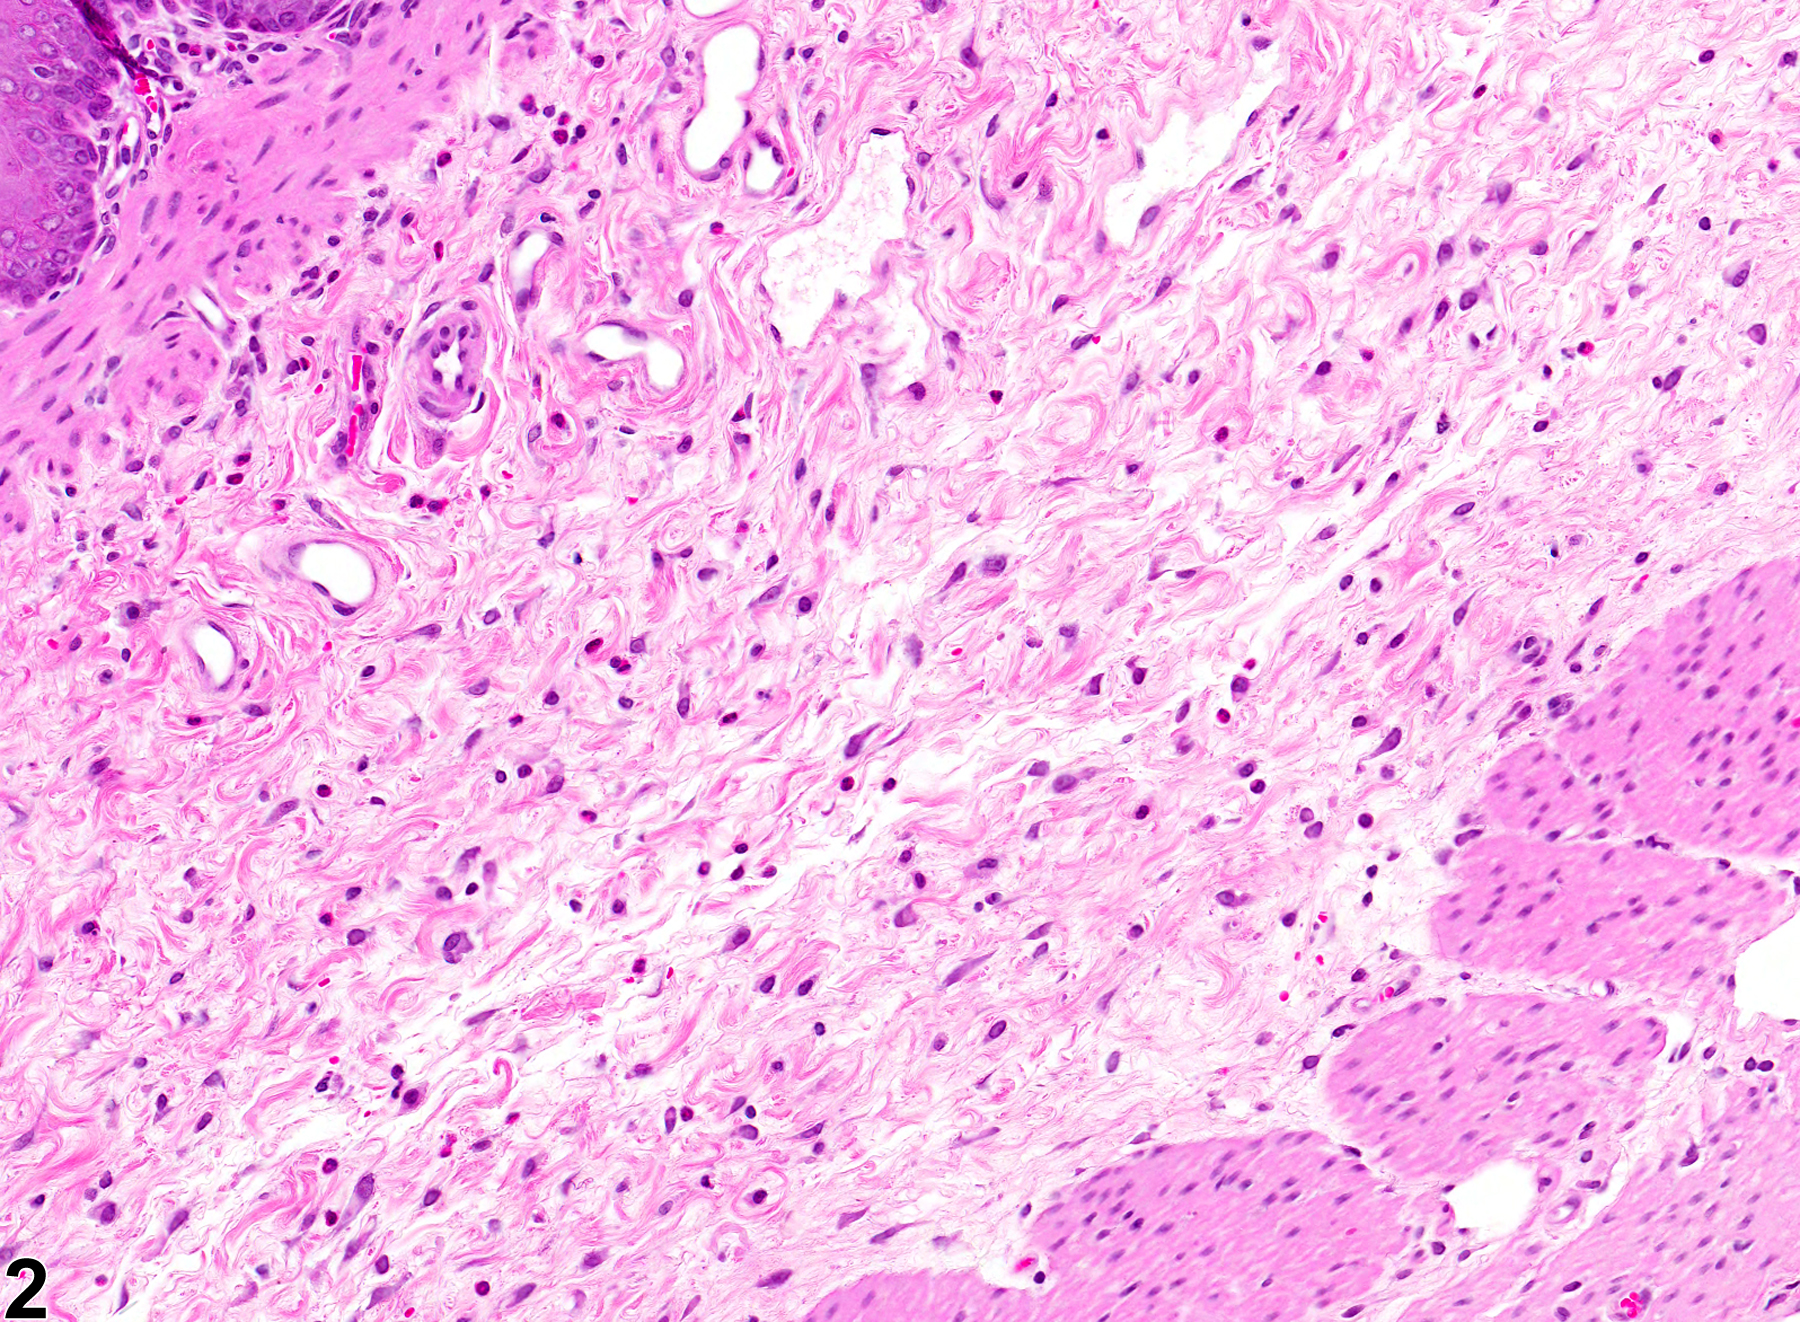 Image of fibrosis in the forestomach from a female F344/N rat in a chronic study